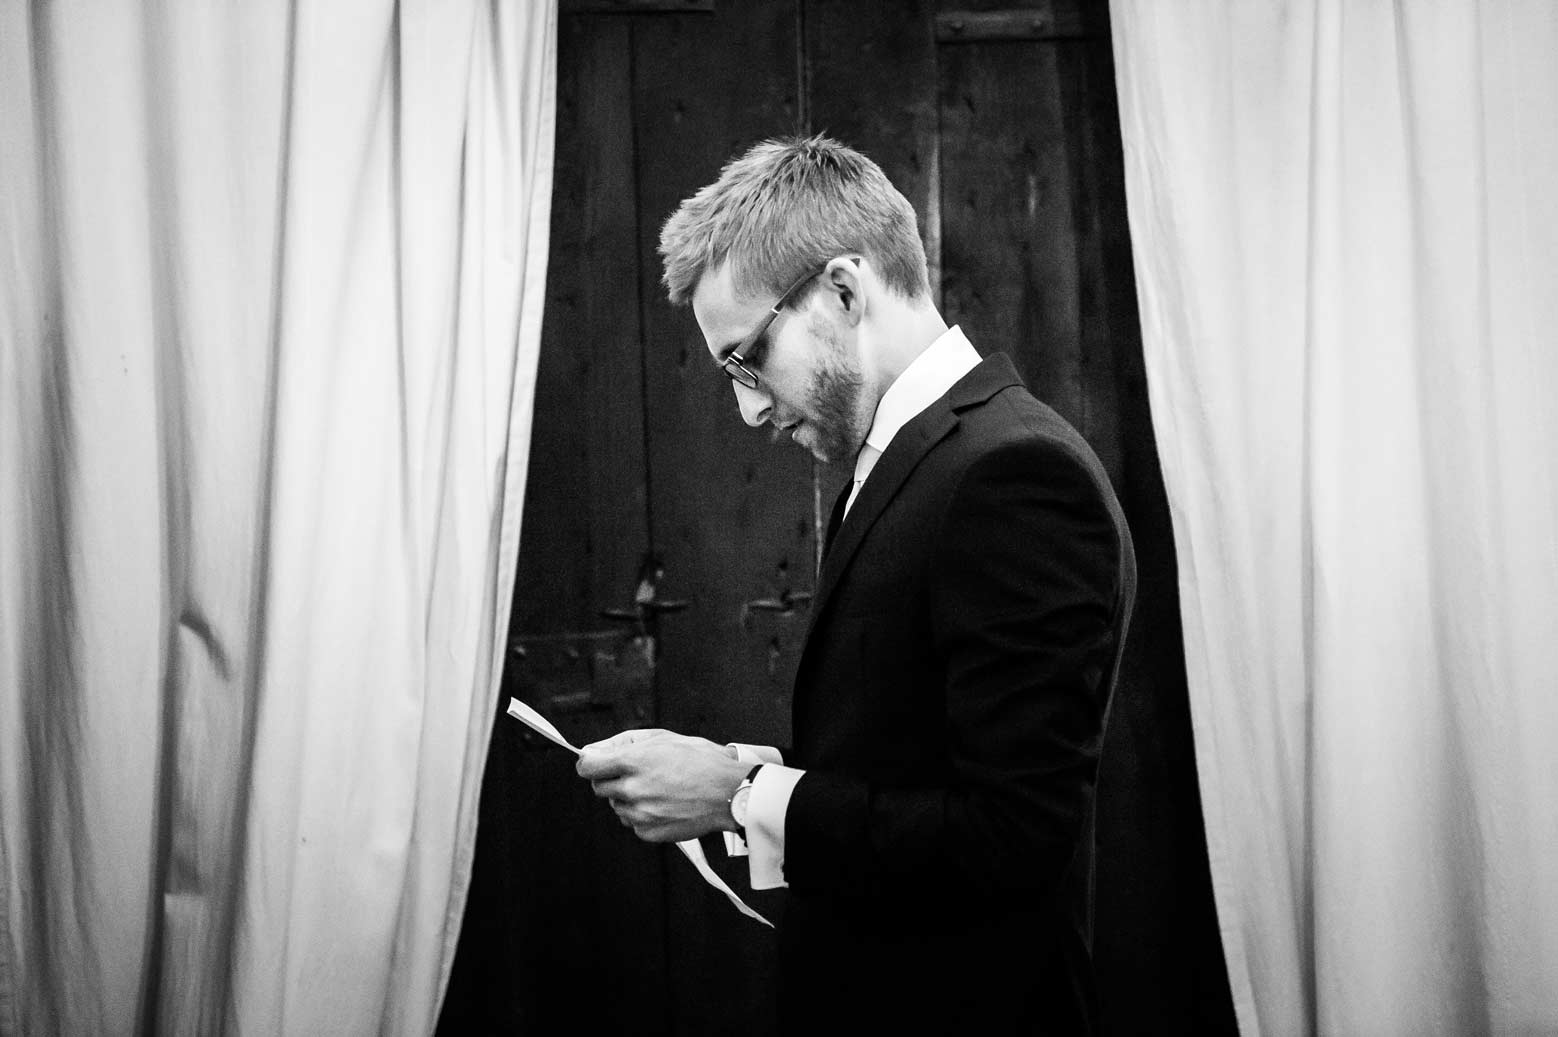 Groom reading his speech, picture shot in documentary wedding photography style